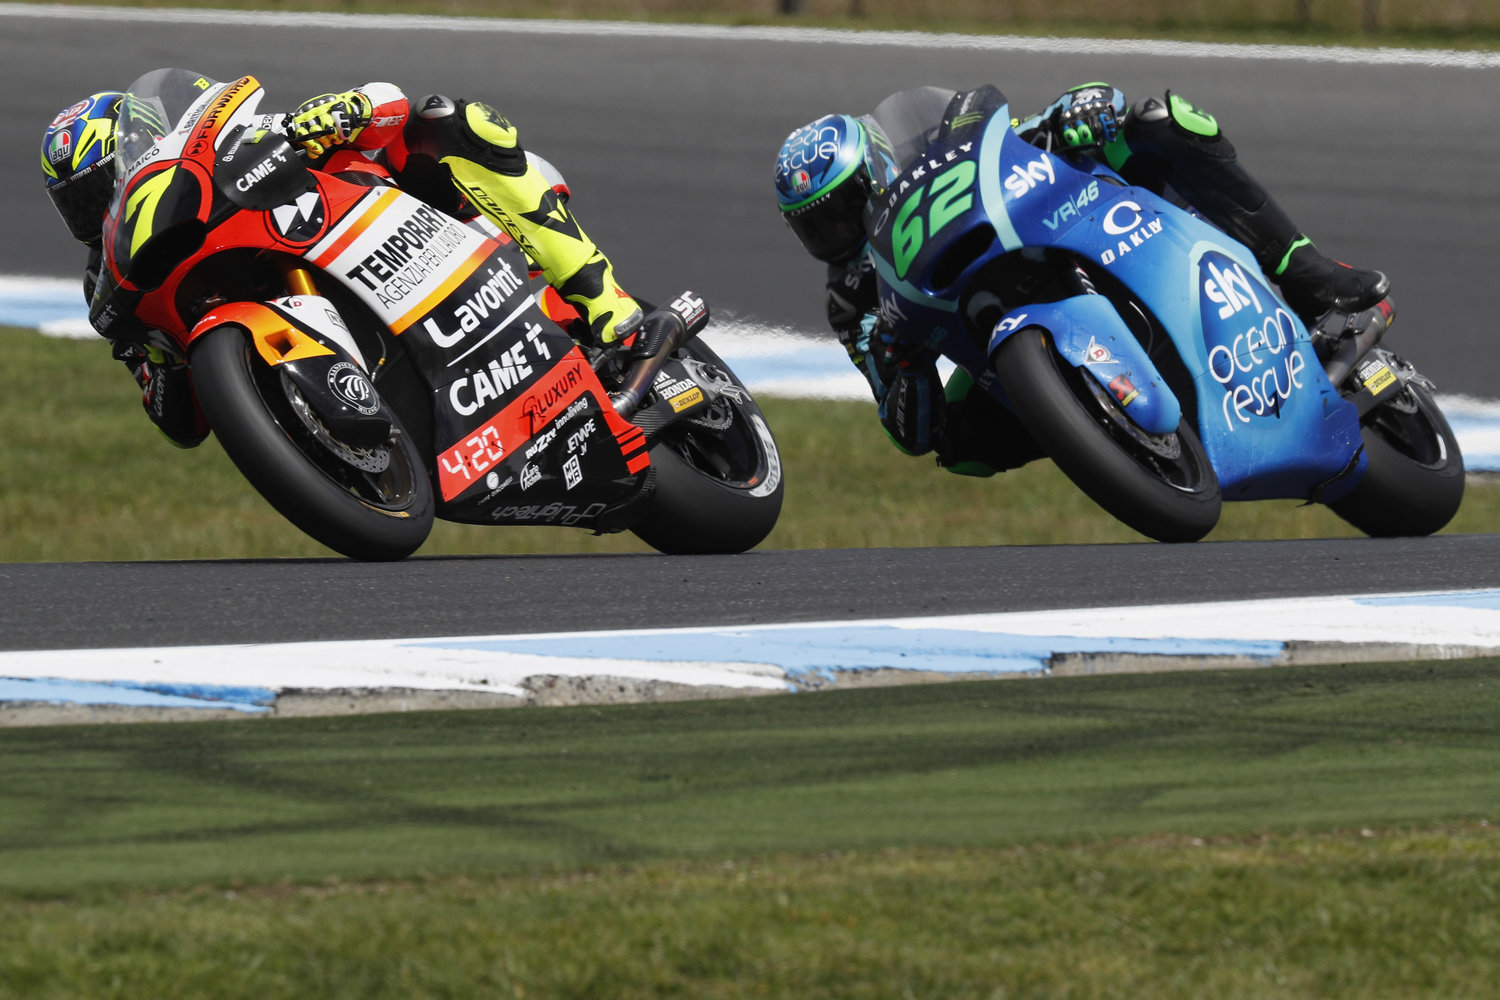 Forward Racing to take home points from intense weekend Down Under